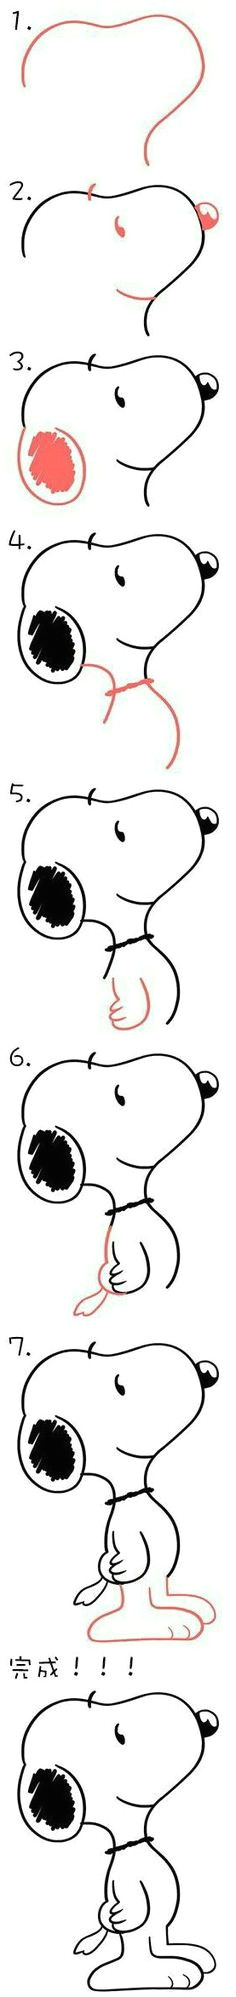 How to Draw Snoopy Step by Step for Kids Easy 9 Best How to Draw Snoopy Friends Images Snoopy Drawing